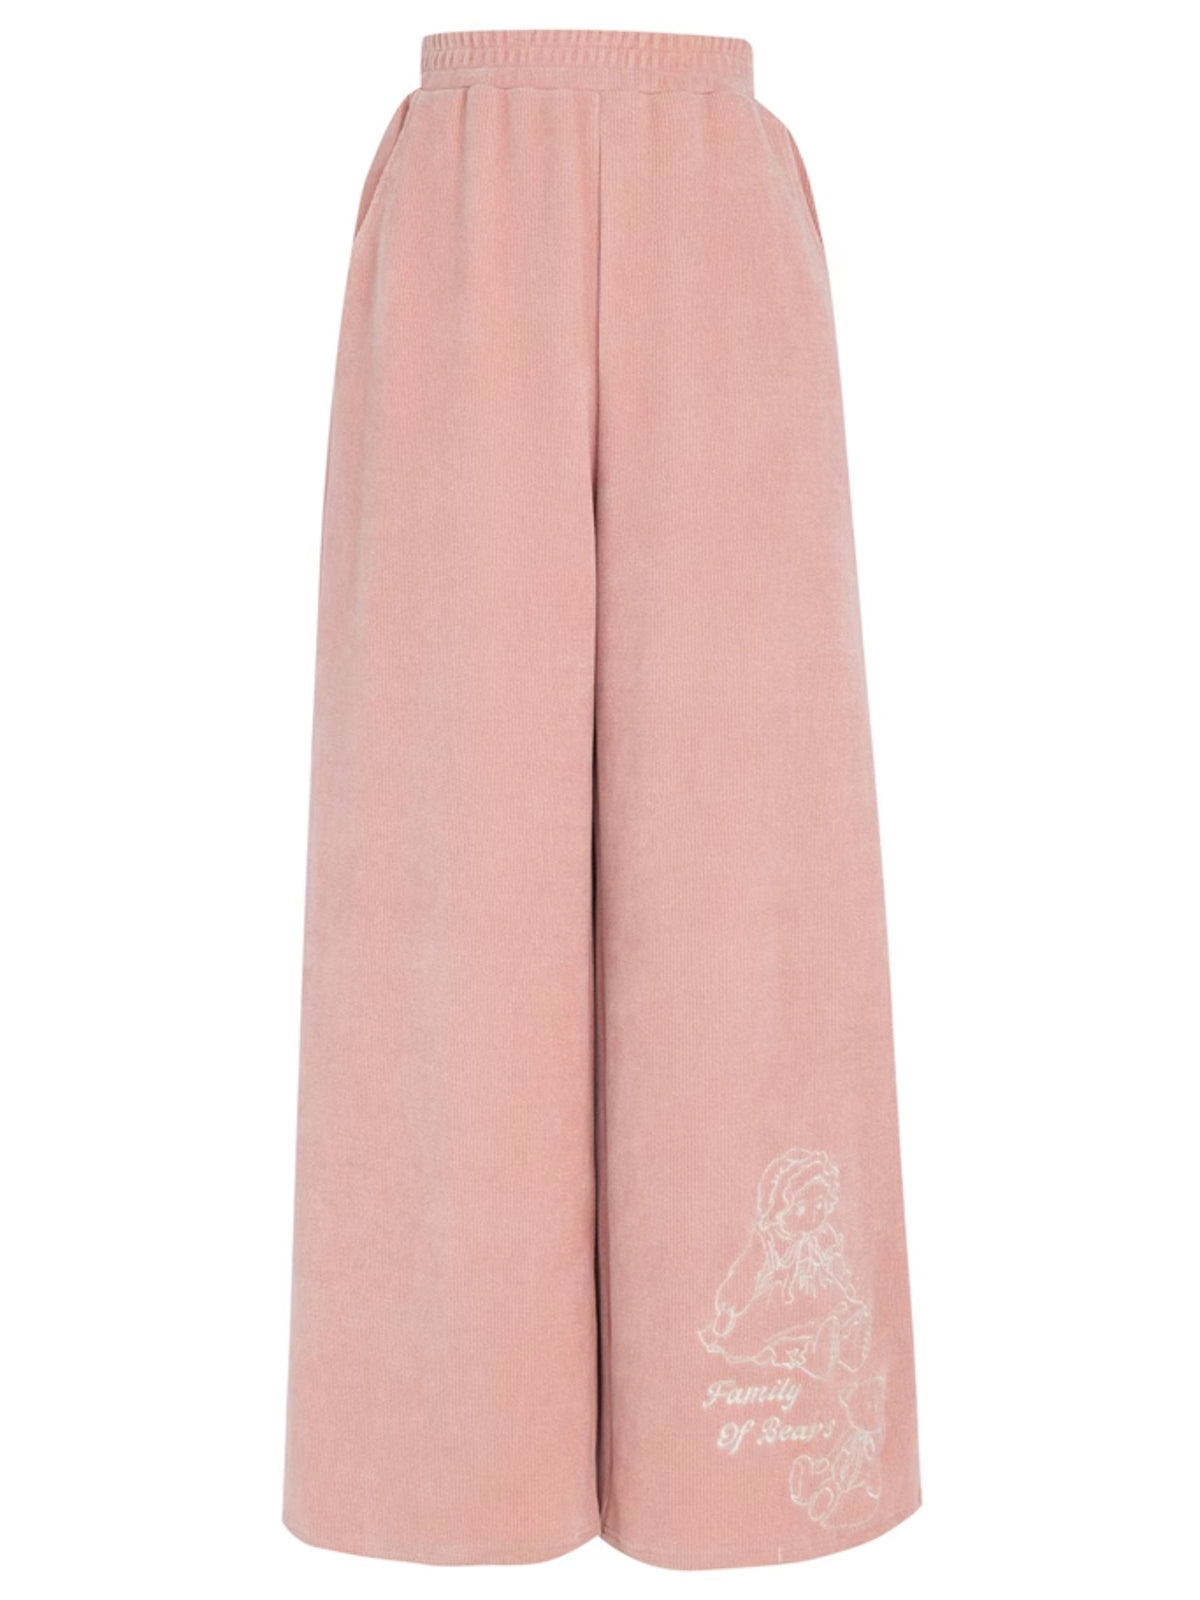 Soft and Cute Family of Bears Pink Wide Leg Pants-ntbhshop